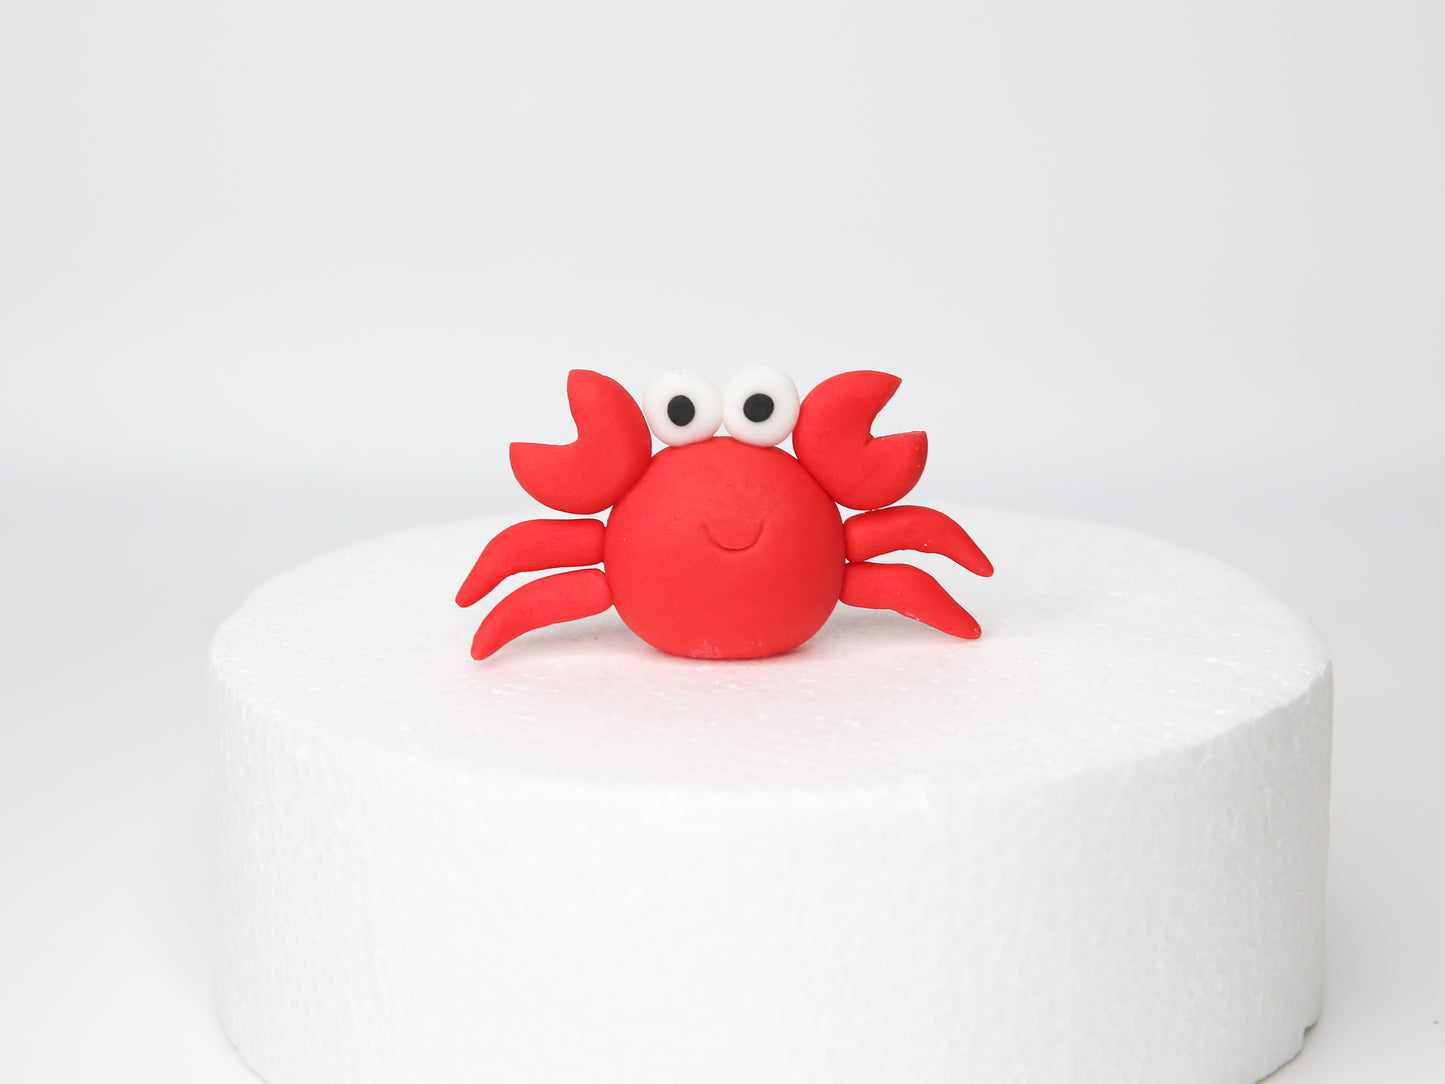 Ocean Animals and Diver Under the Sea Themed Edible Fondant Cake Toppers